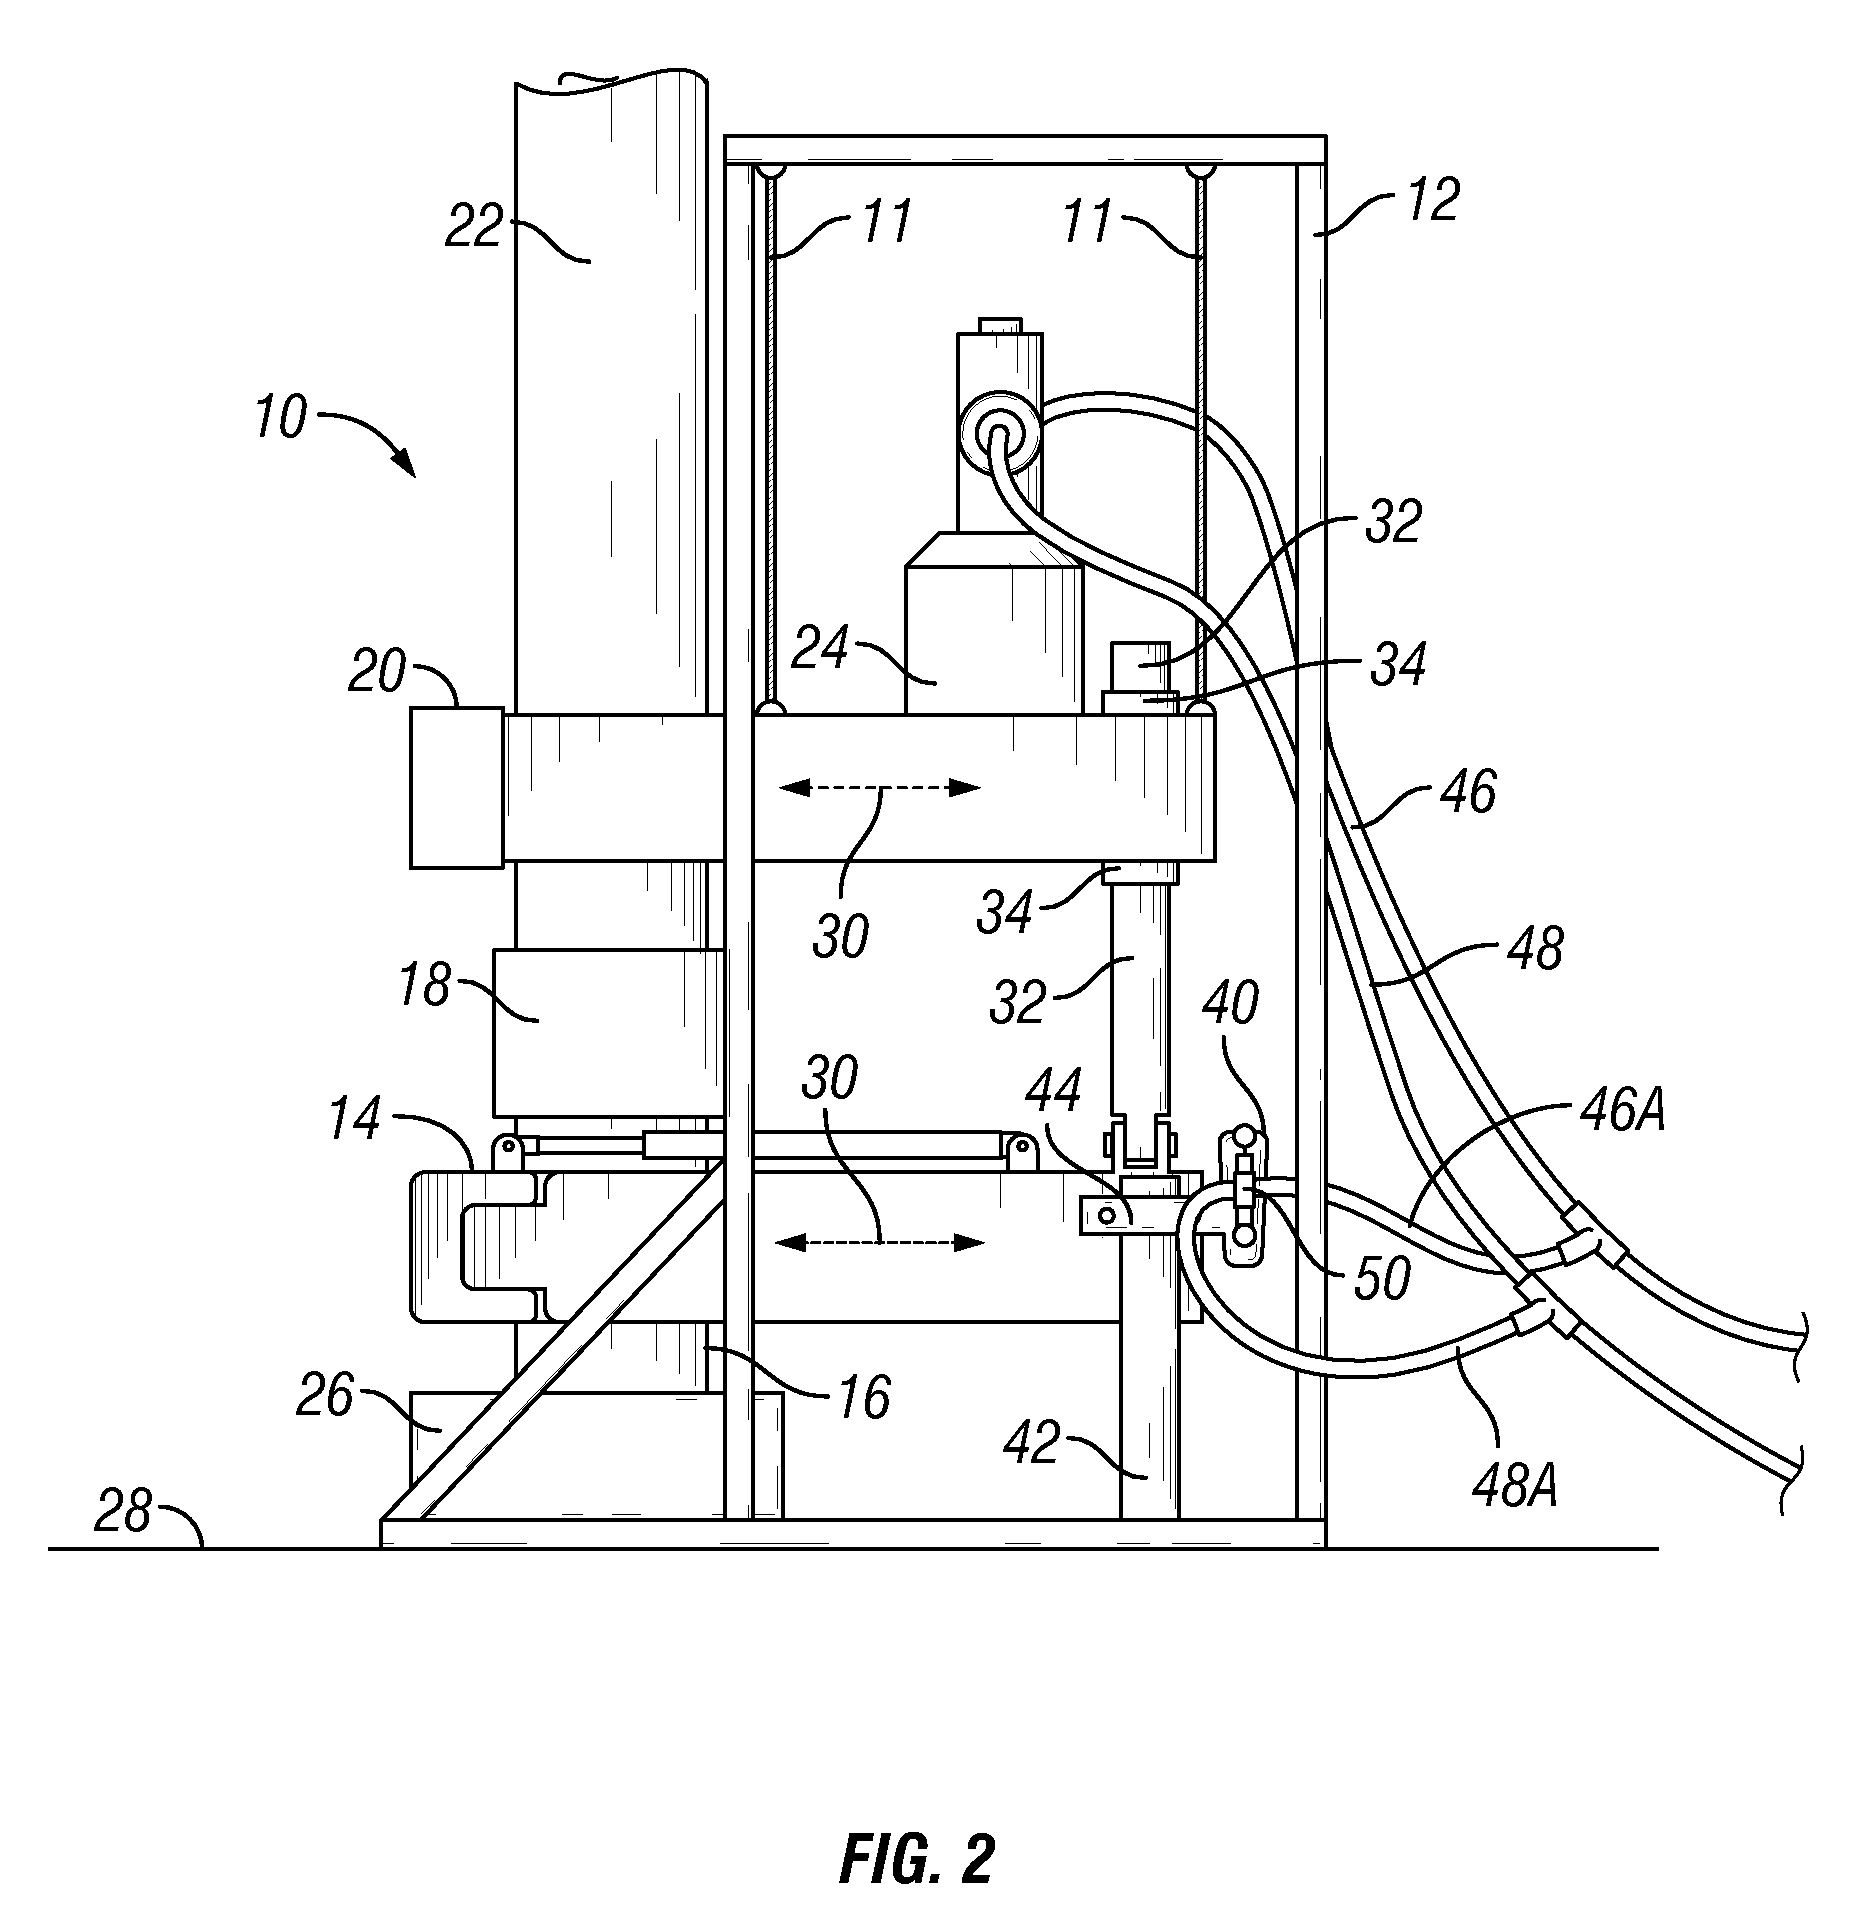 Slippage sensor and method of operating an integrated power tong and back-up tong